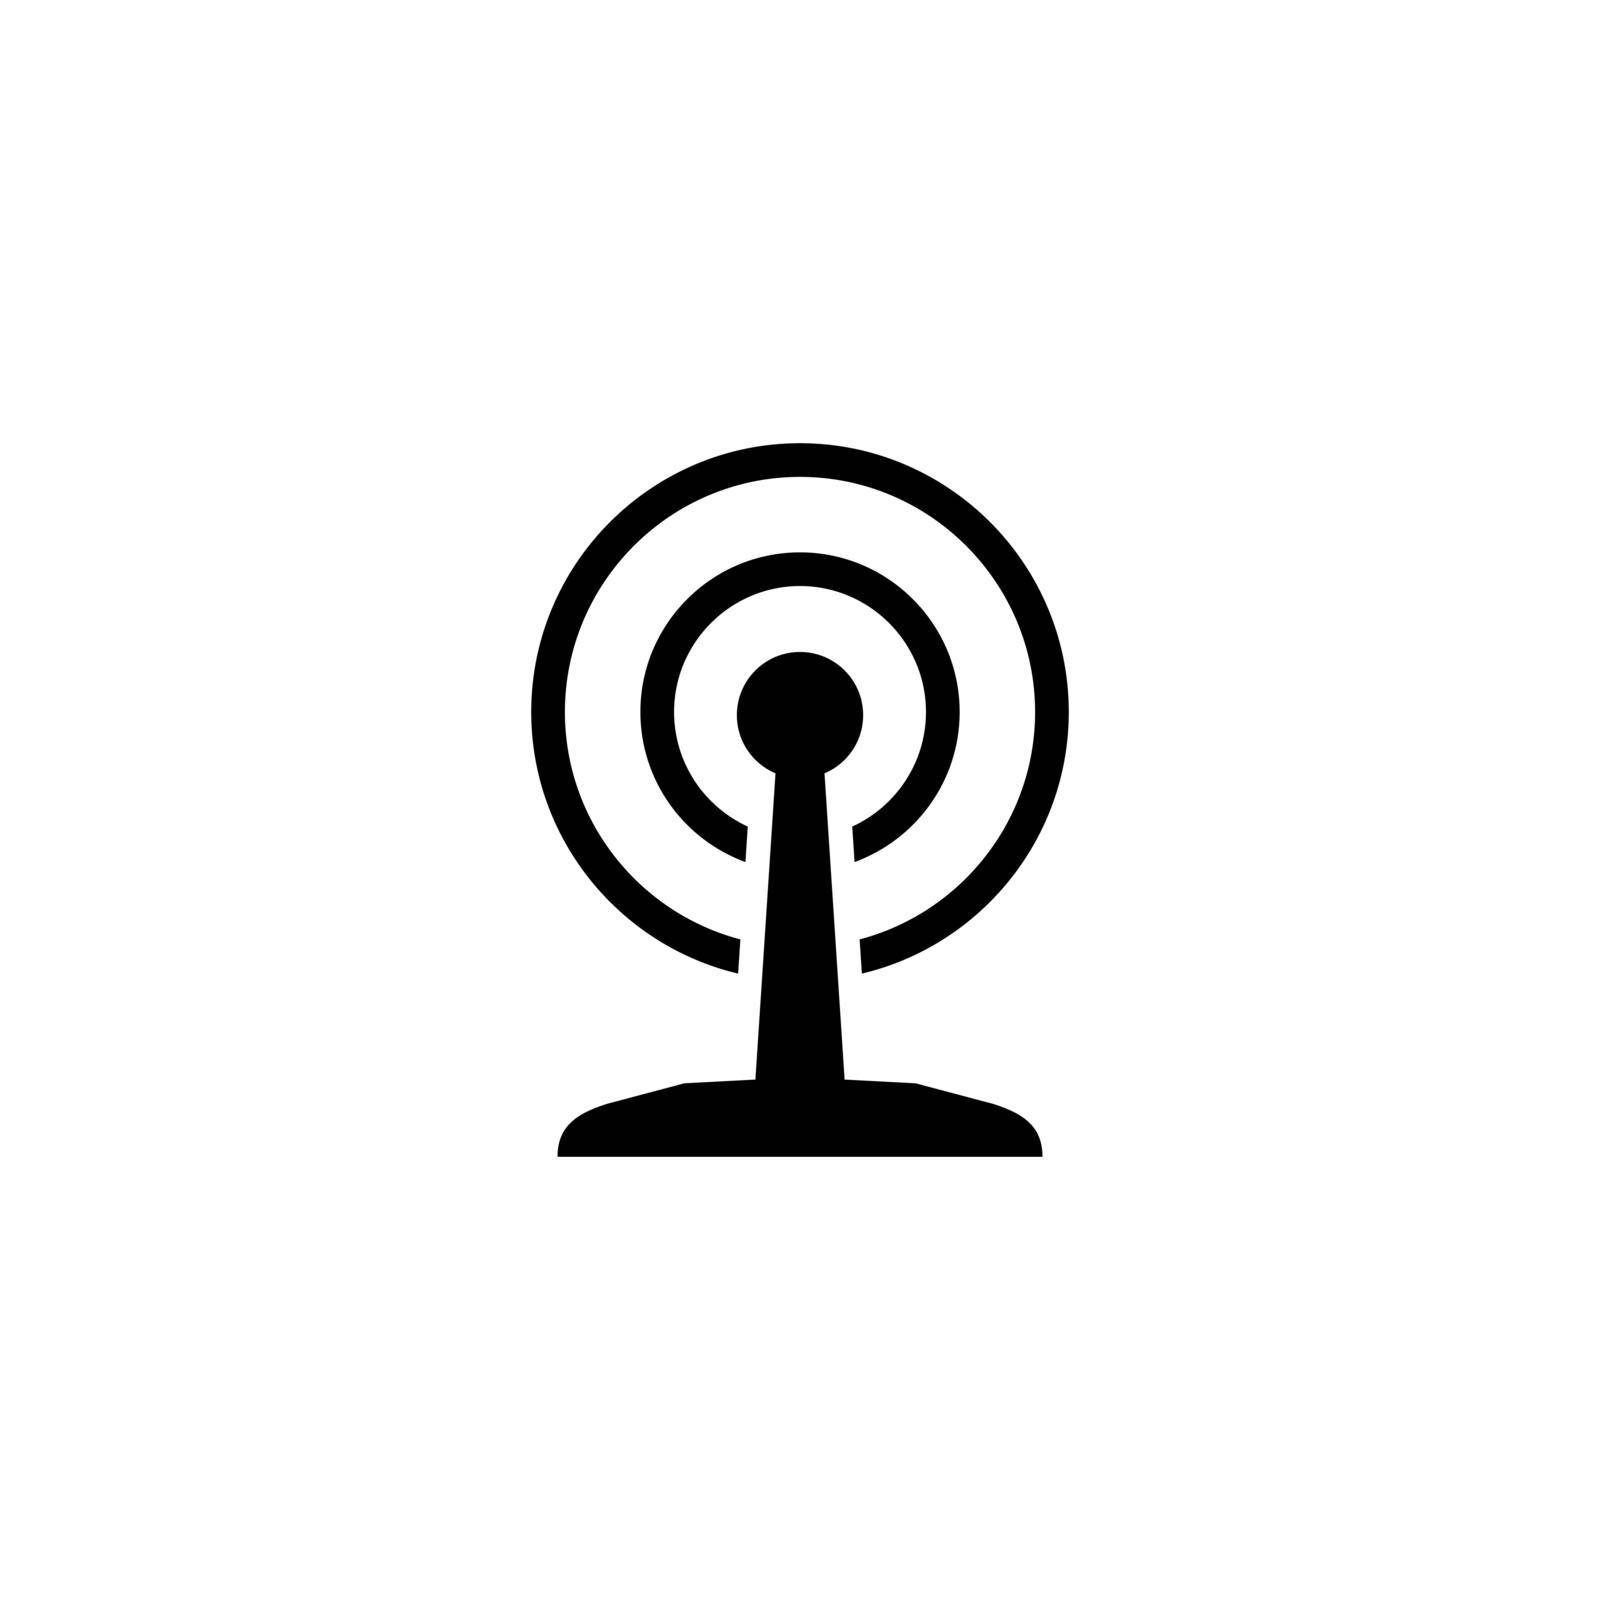 Broadcast Antenna Flat Vector Icon by sfinks